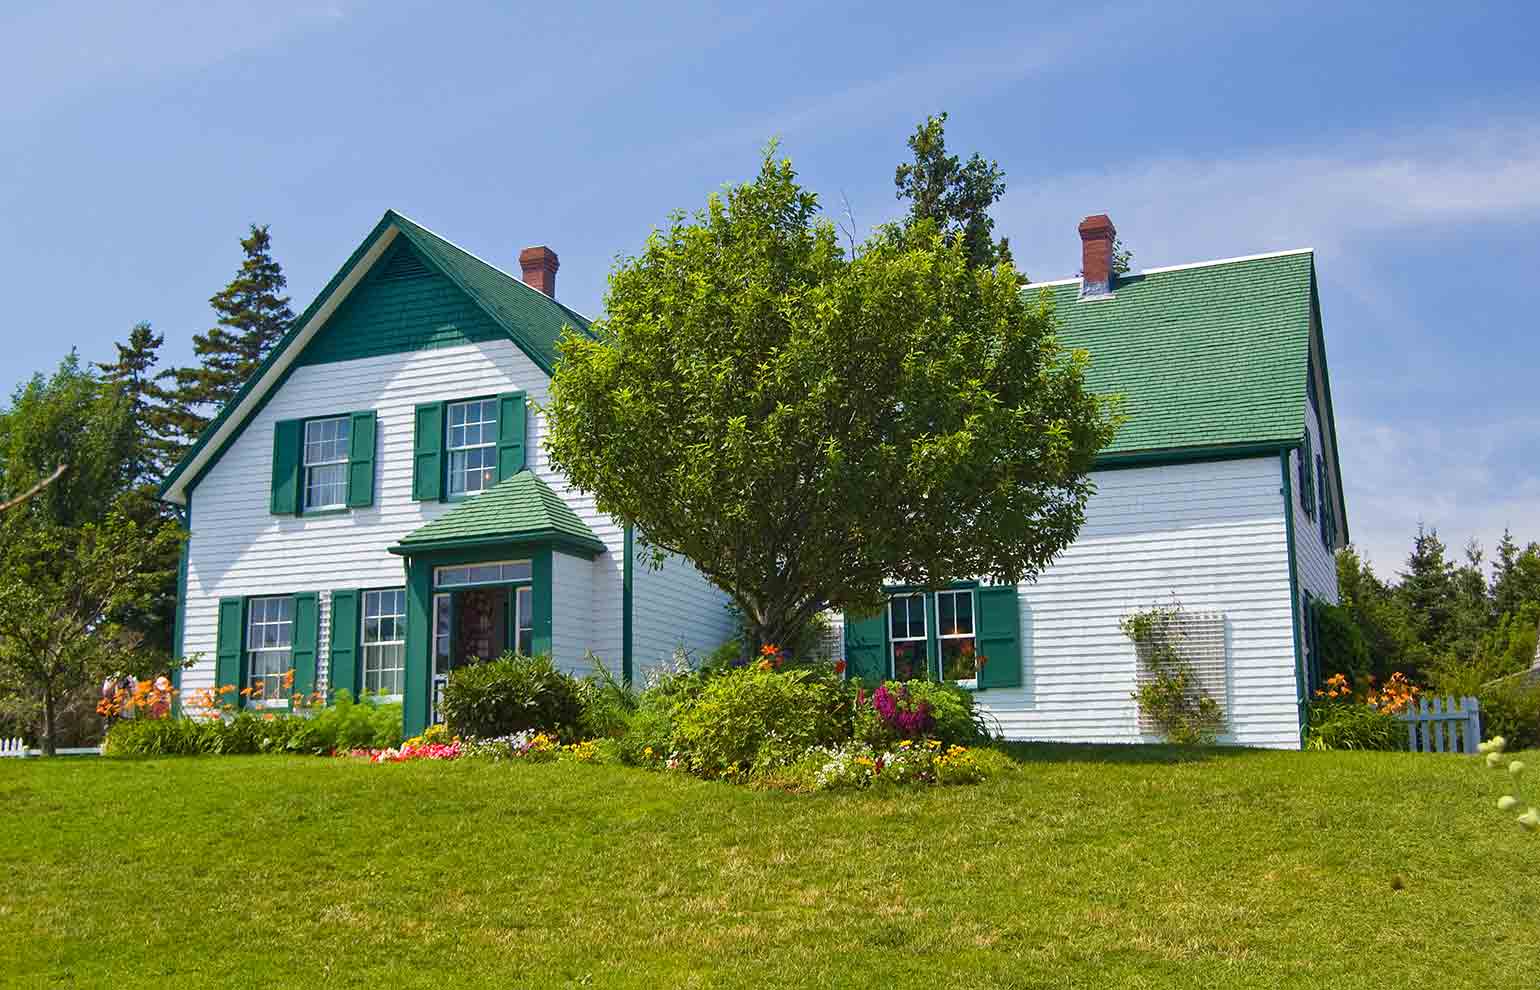  House of Green Gables